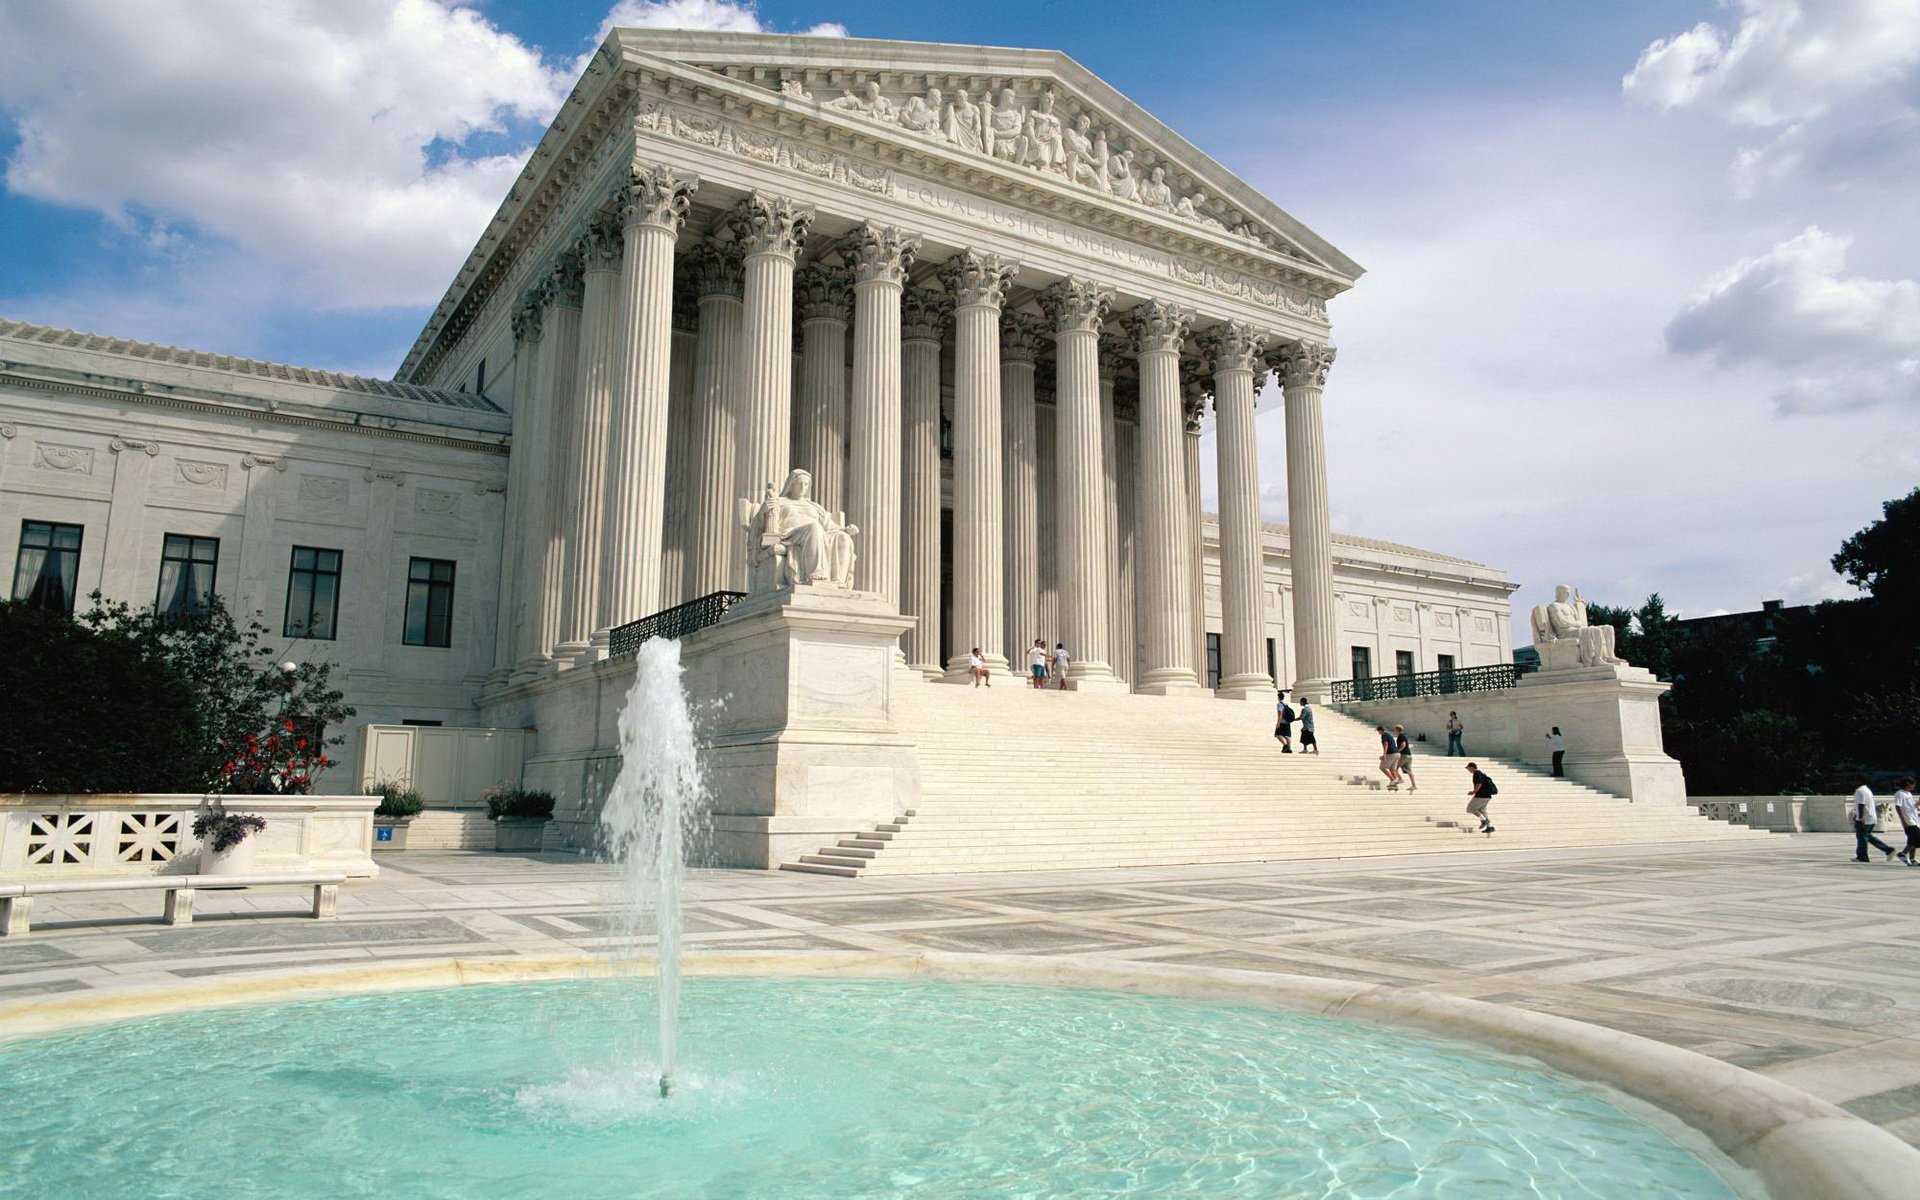 Download Majestic Supreme Court Building at Daytime Wallpaper